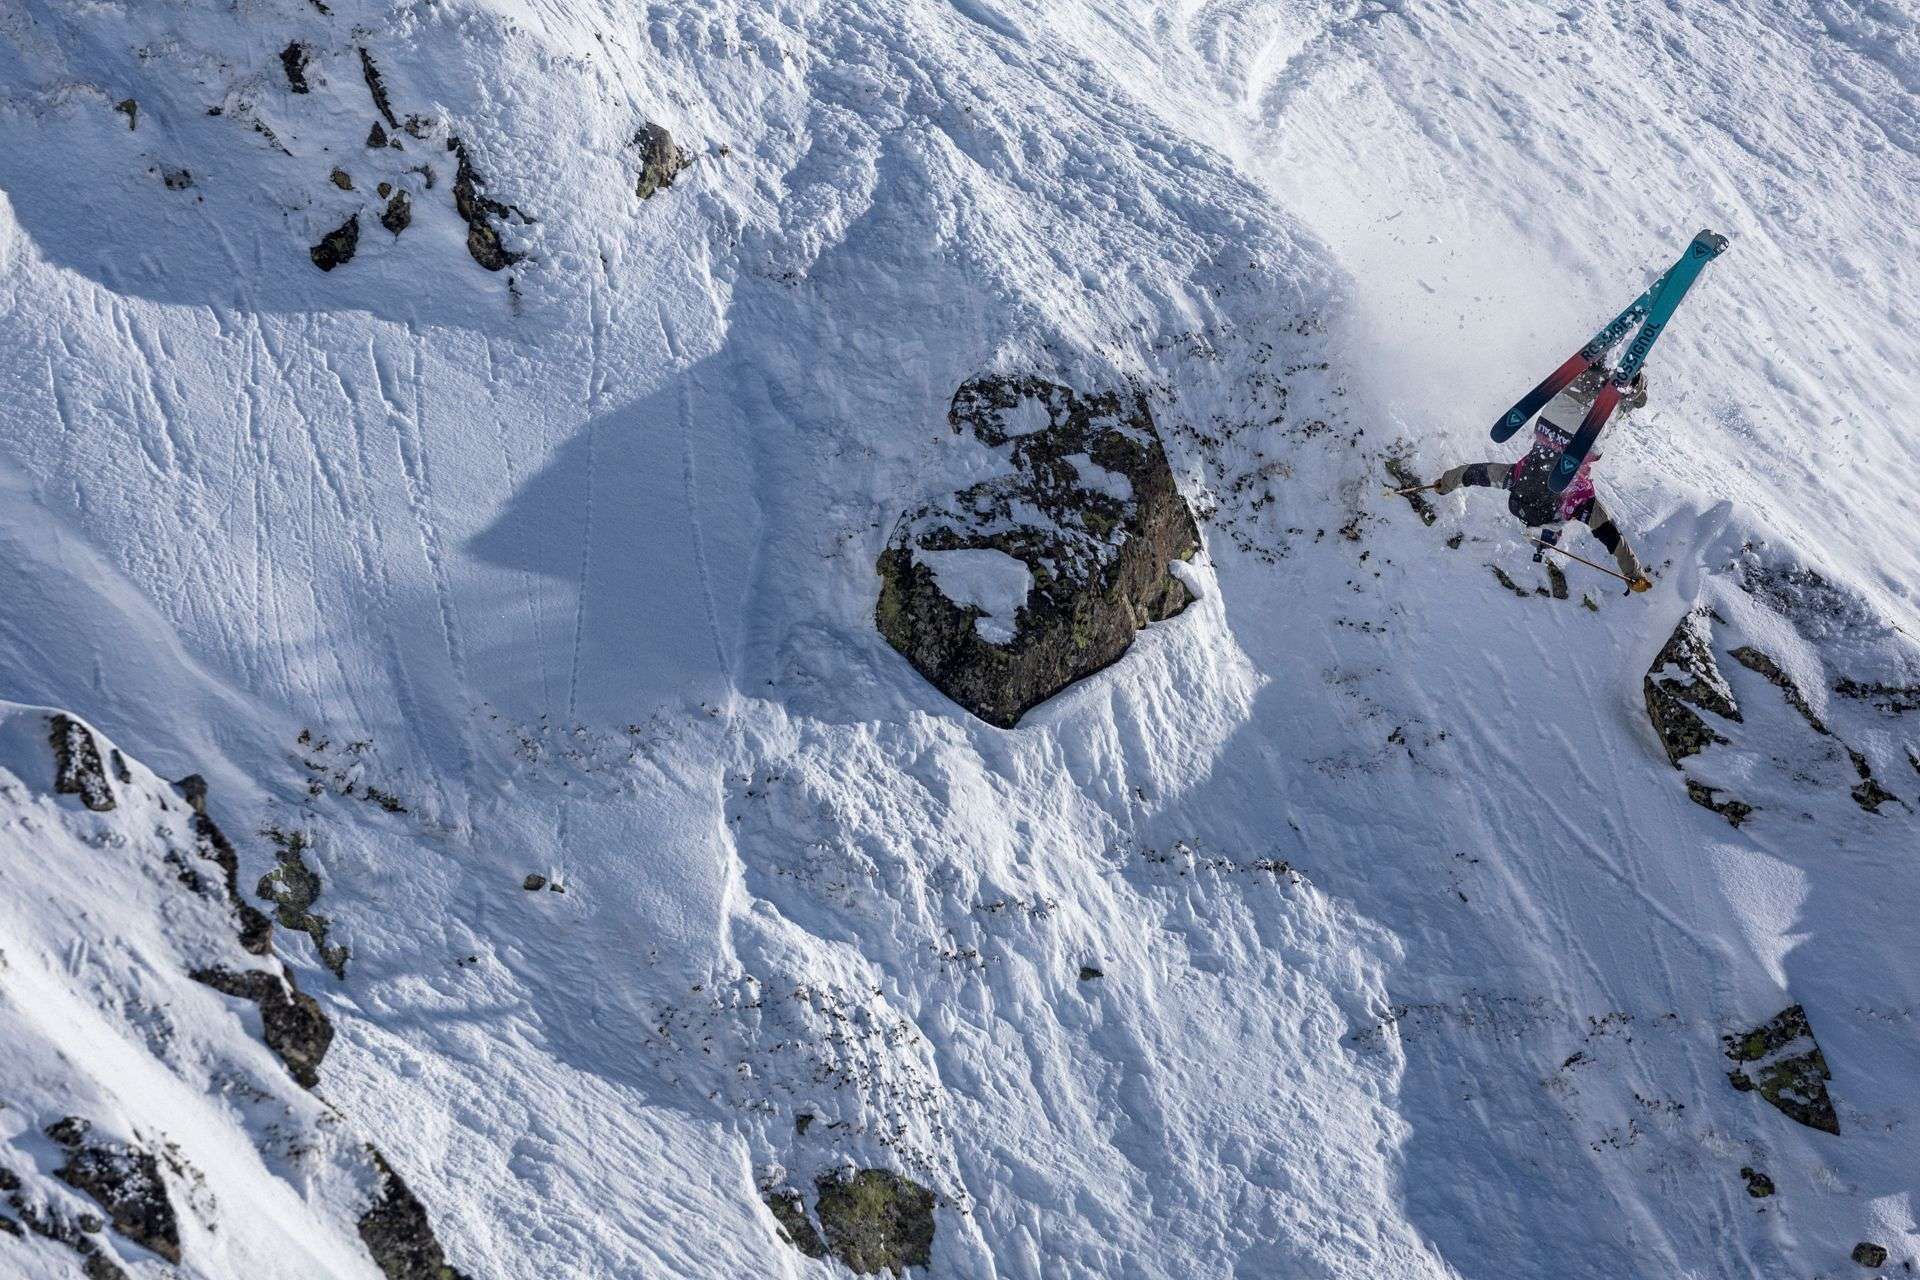 Huge backflip in impressive freeride show by winner Max Palm at Freeride World Tour in Baqueira Beret